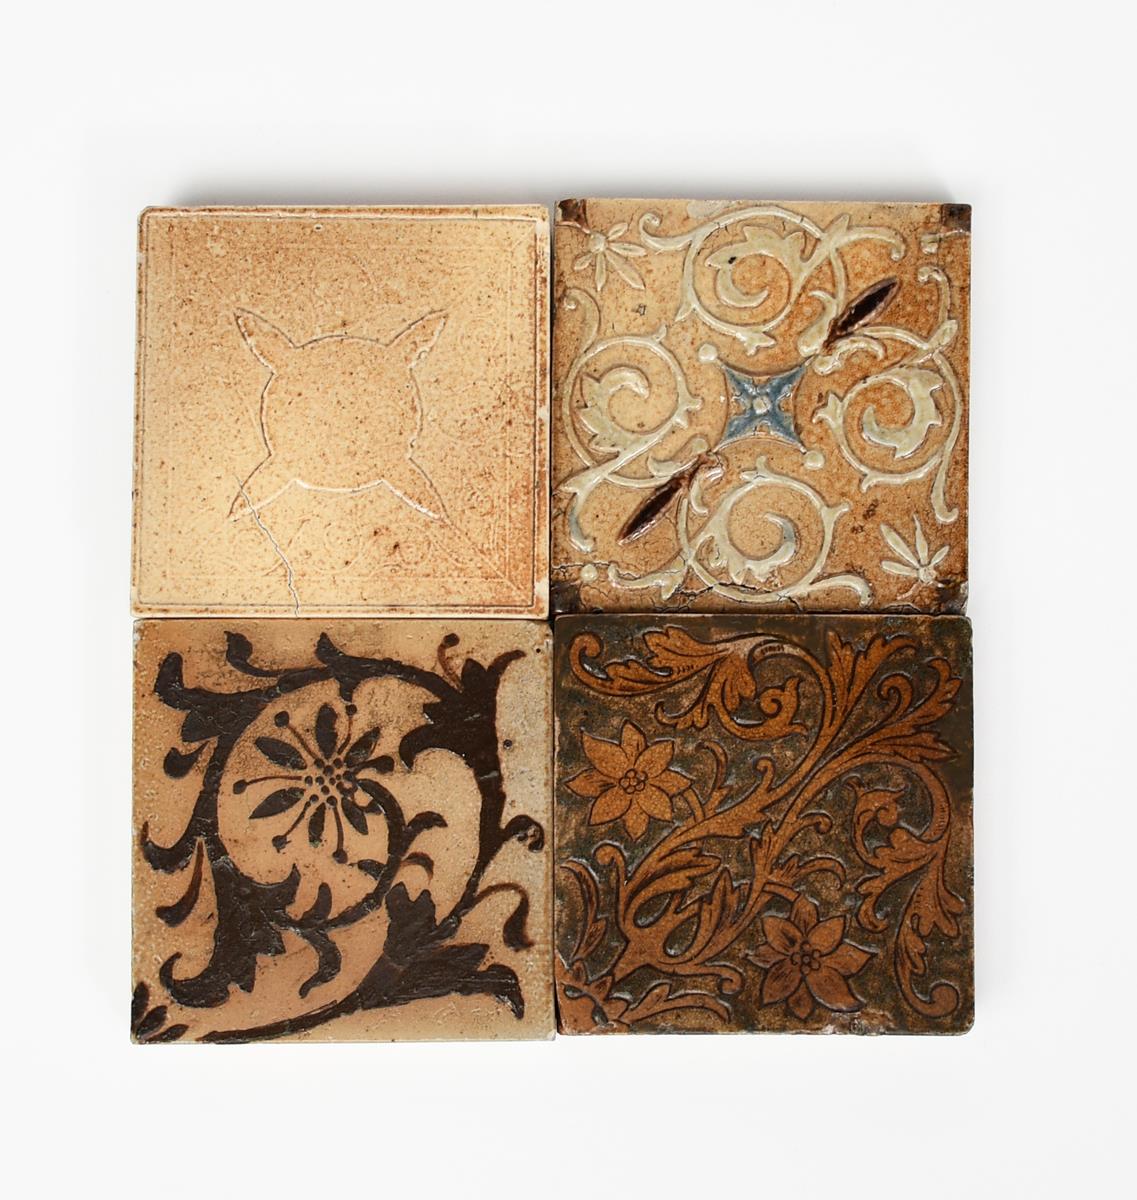 A Martin Brothers stoneware tile, square, incised with flowers and foliage, glazed in shades of